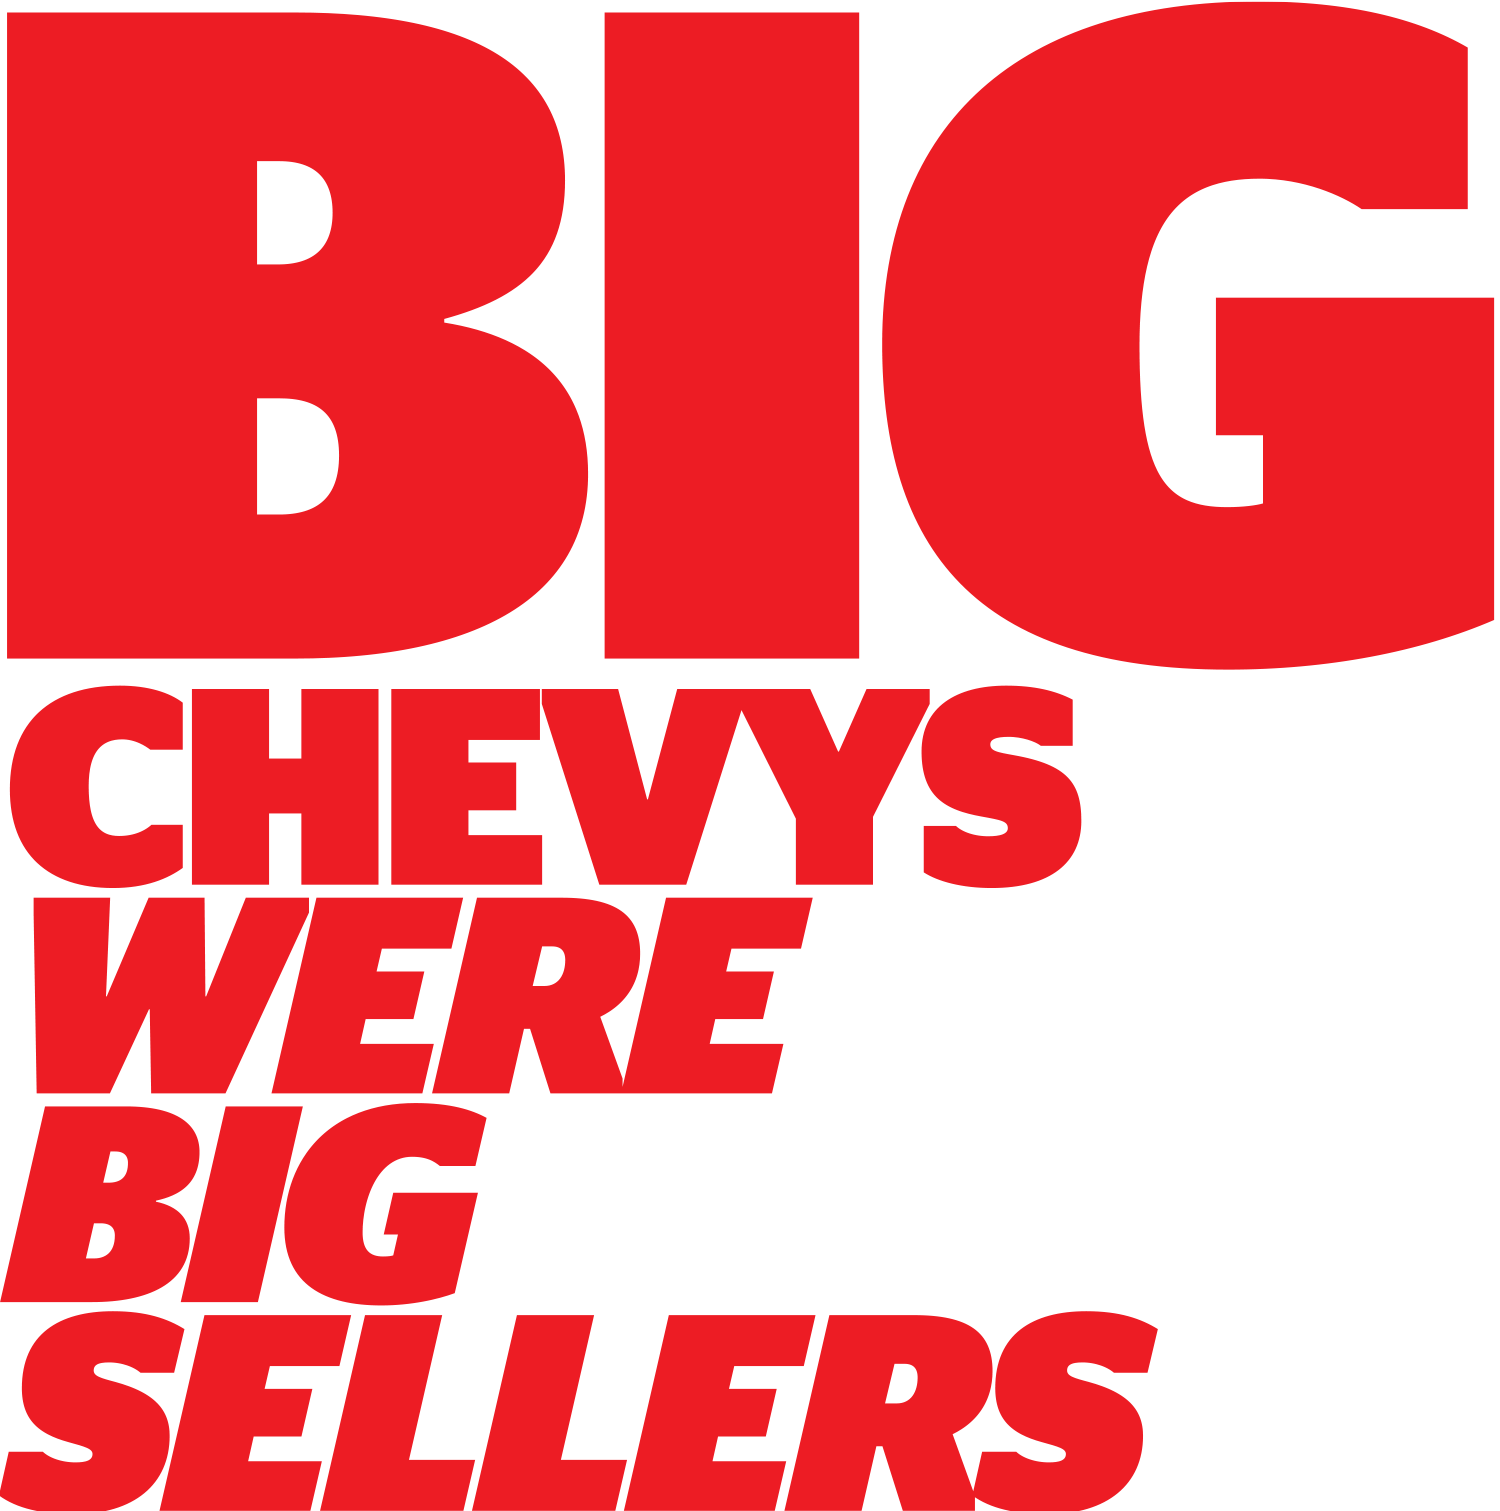 Big Chevys Were Big Sellers title